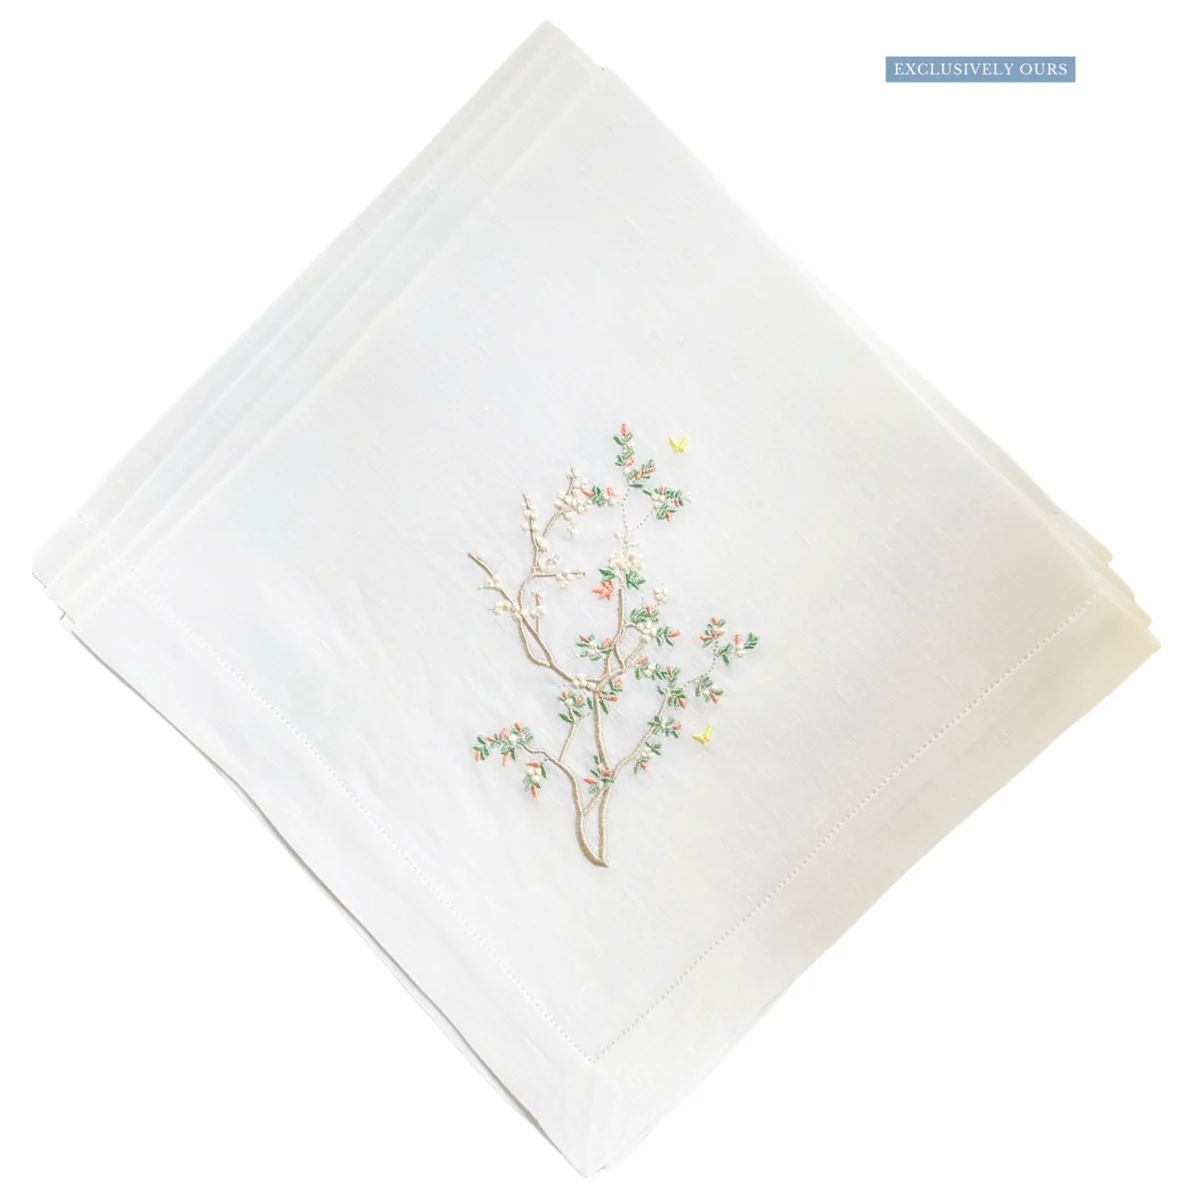 Cherry Blossom Embroidered Dinner Napkins | Set of 4 | Christian Ladd Home